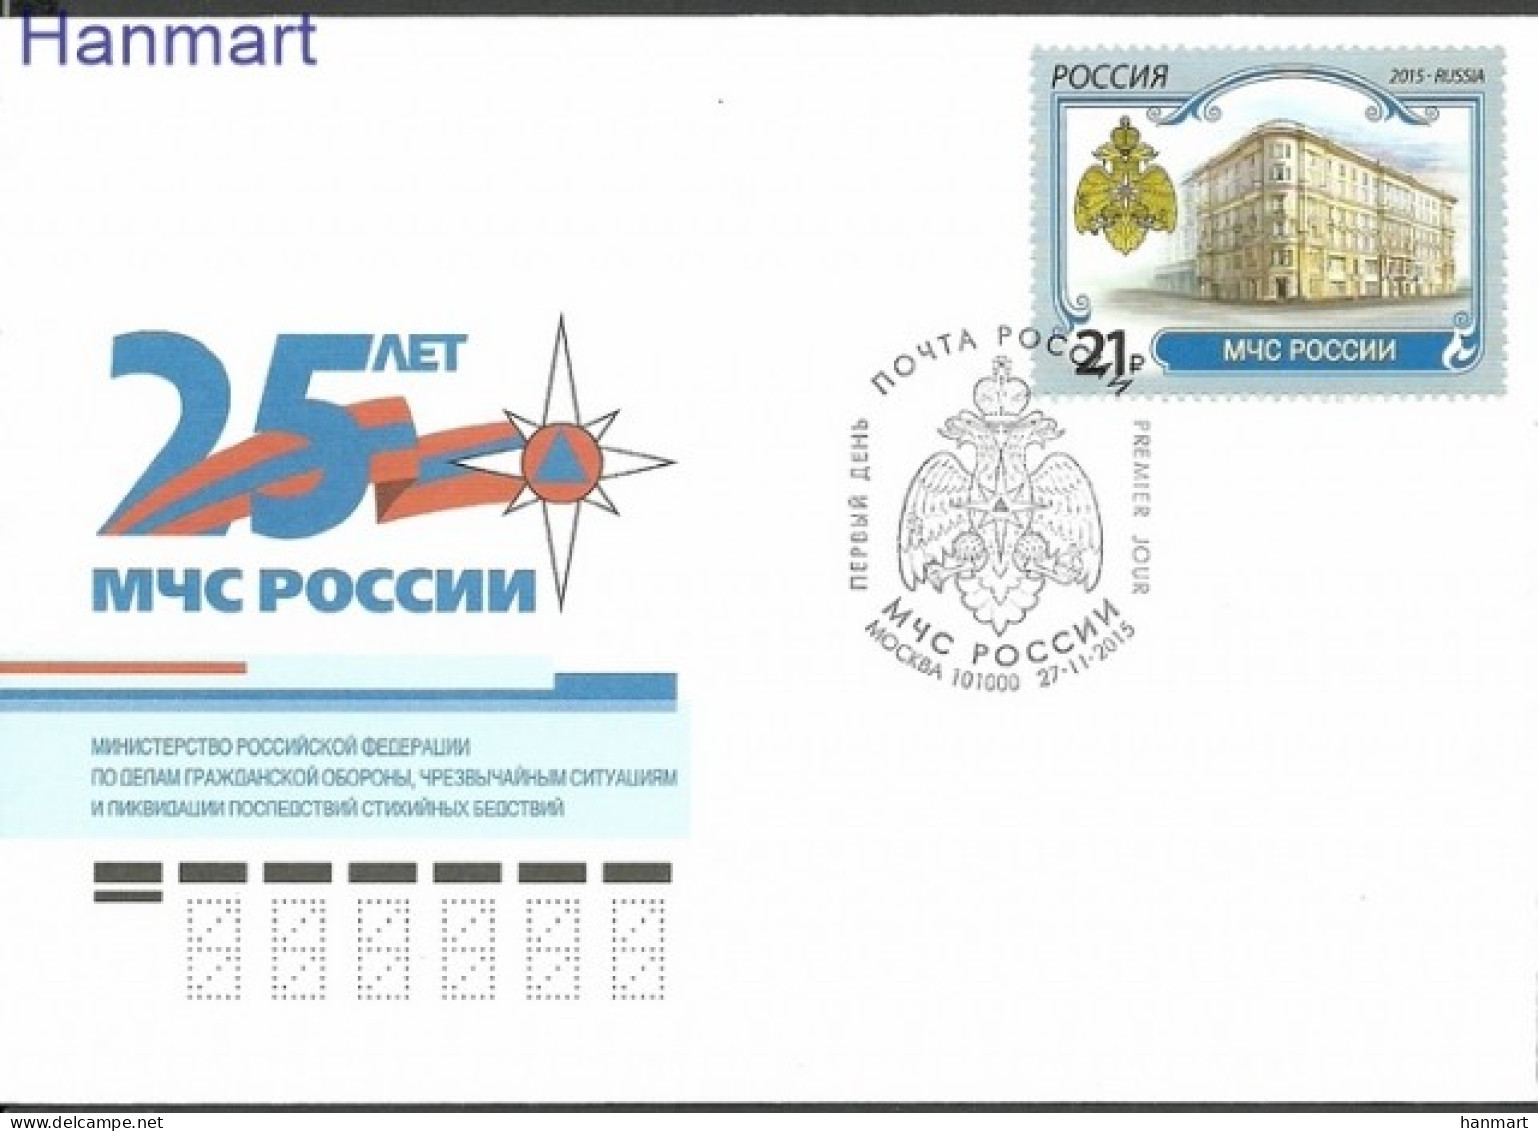 Russia 2015 Mi 2254 FDC  (FDC ZE4 RSS2254) - Stamps